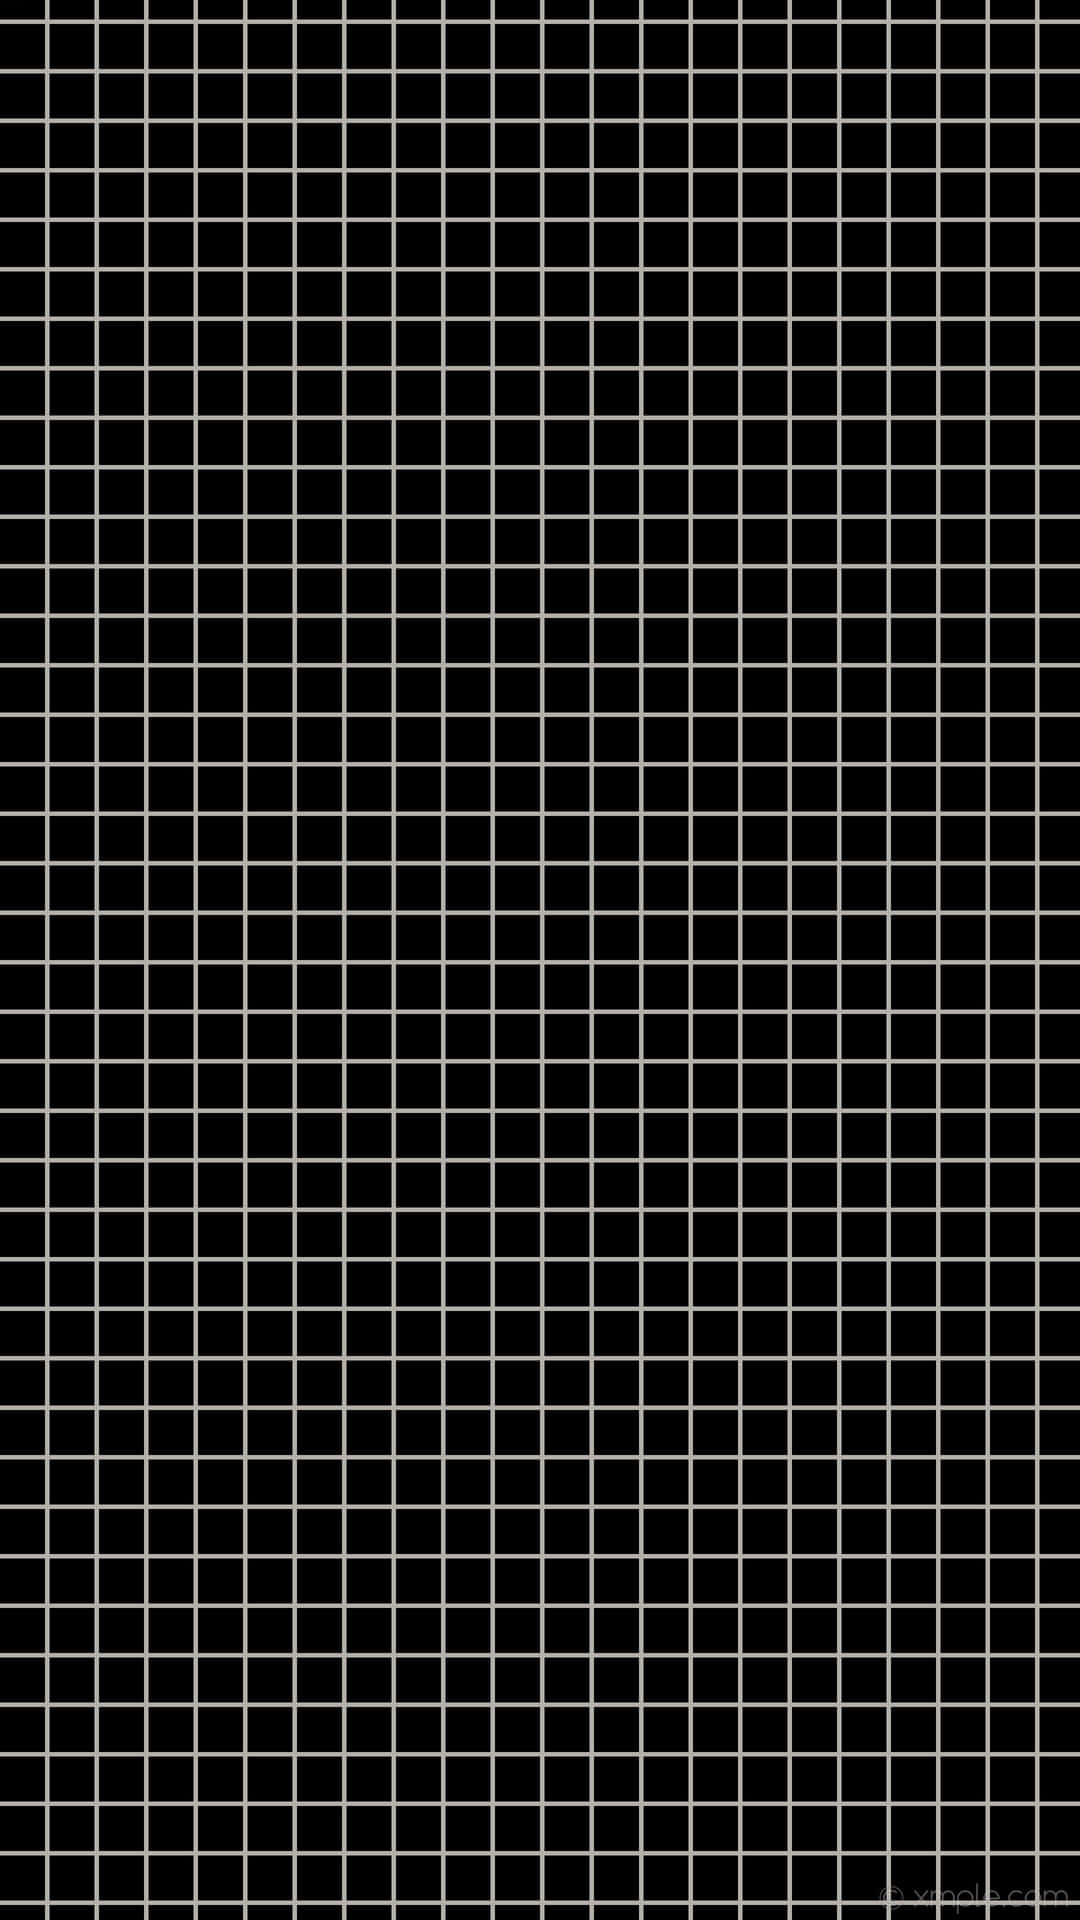 A Black Grid With White Lines On It Wallpaper